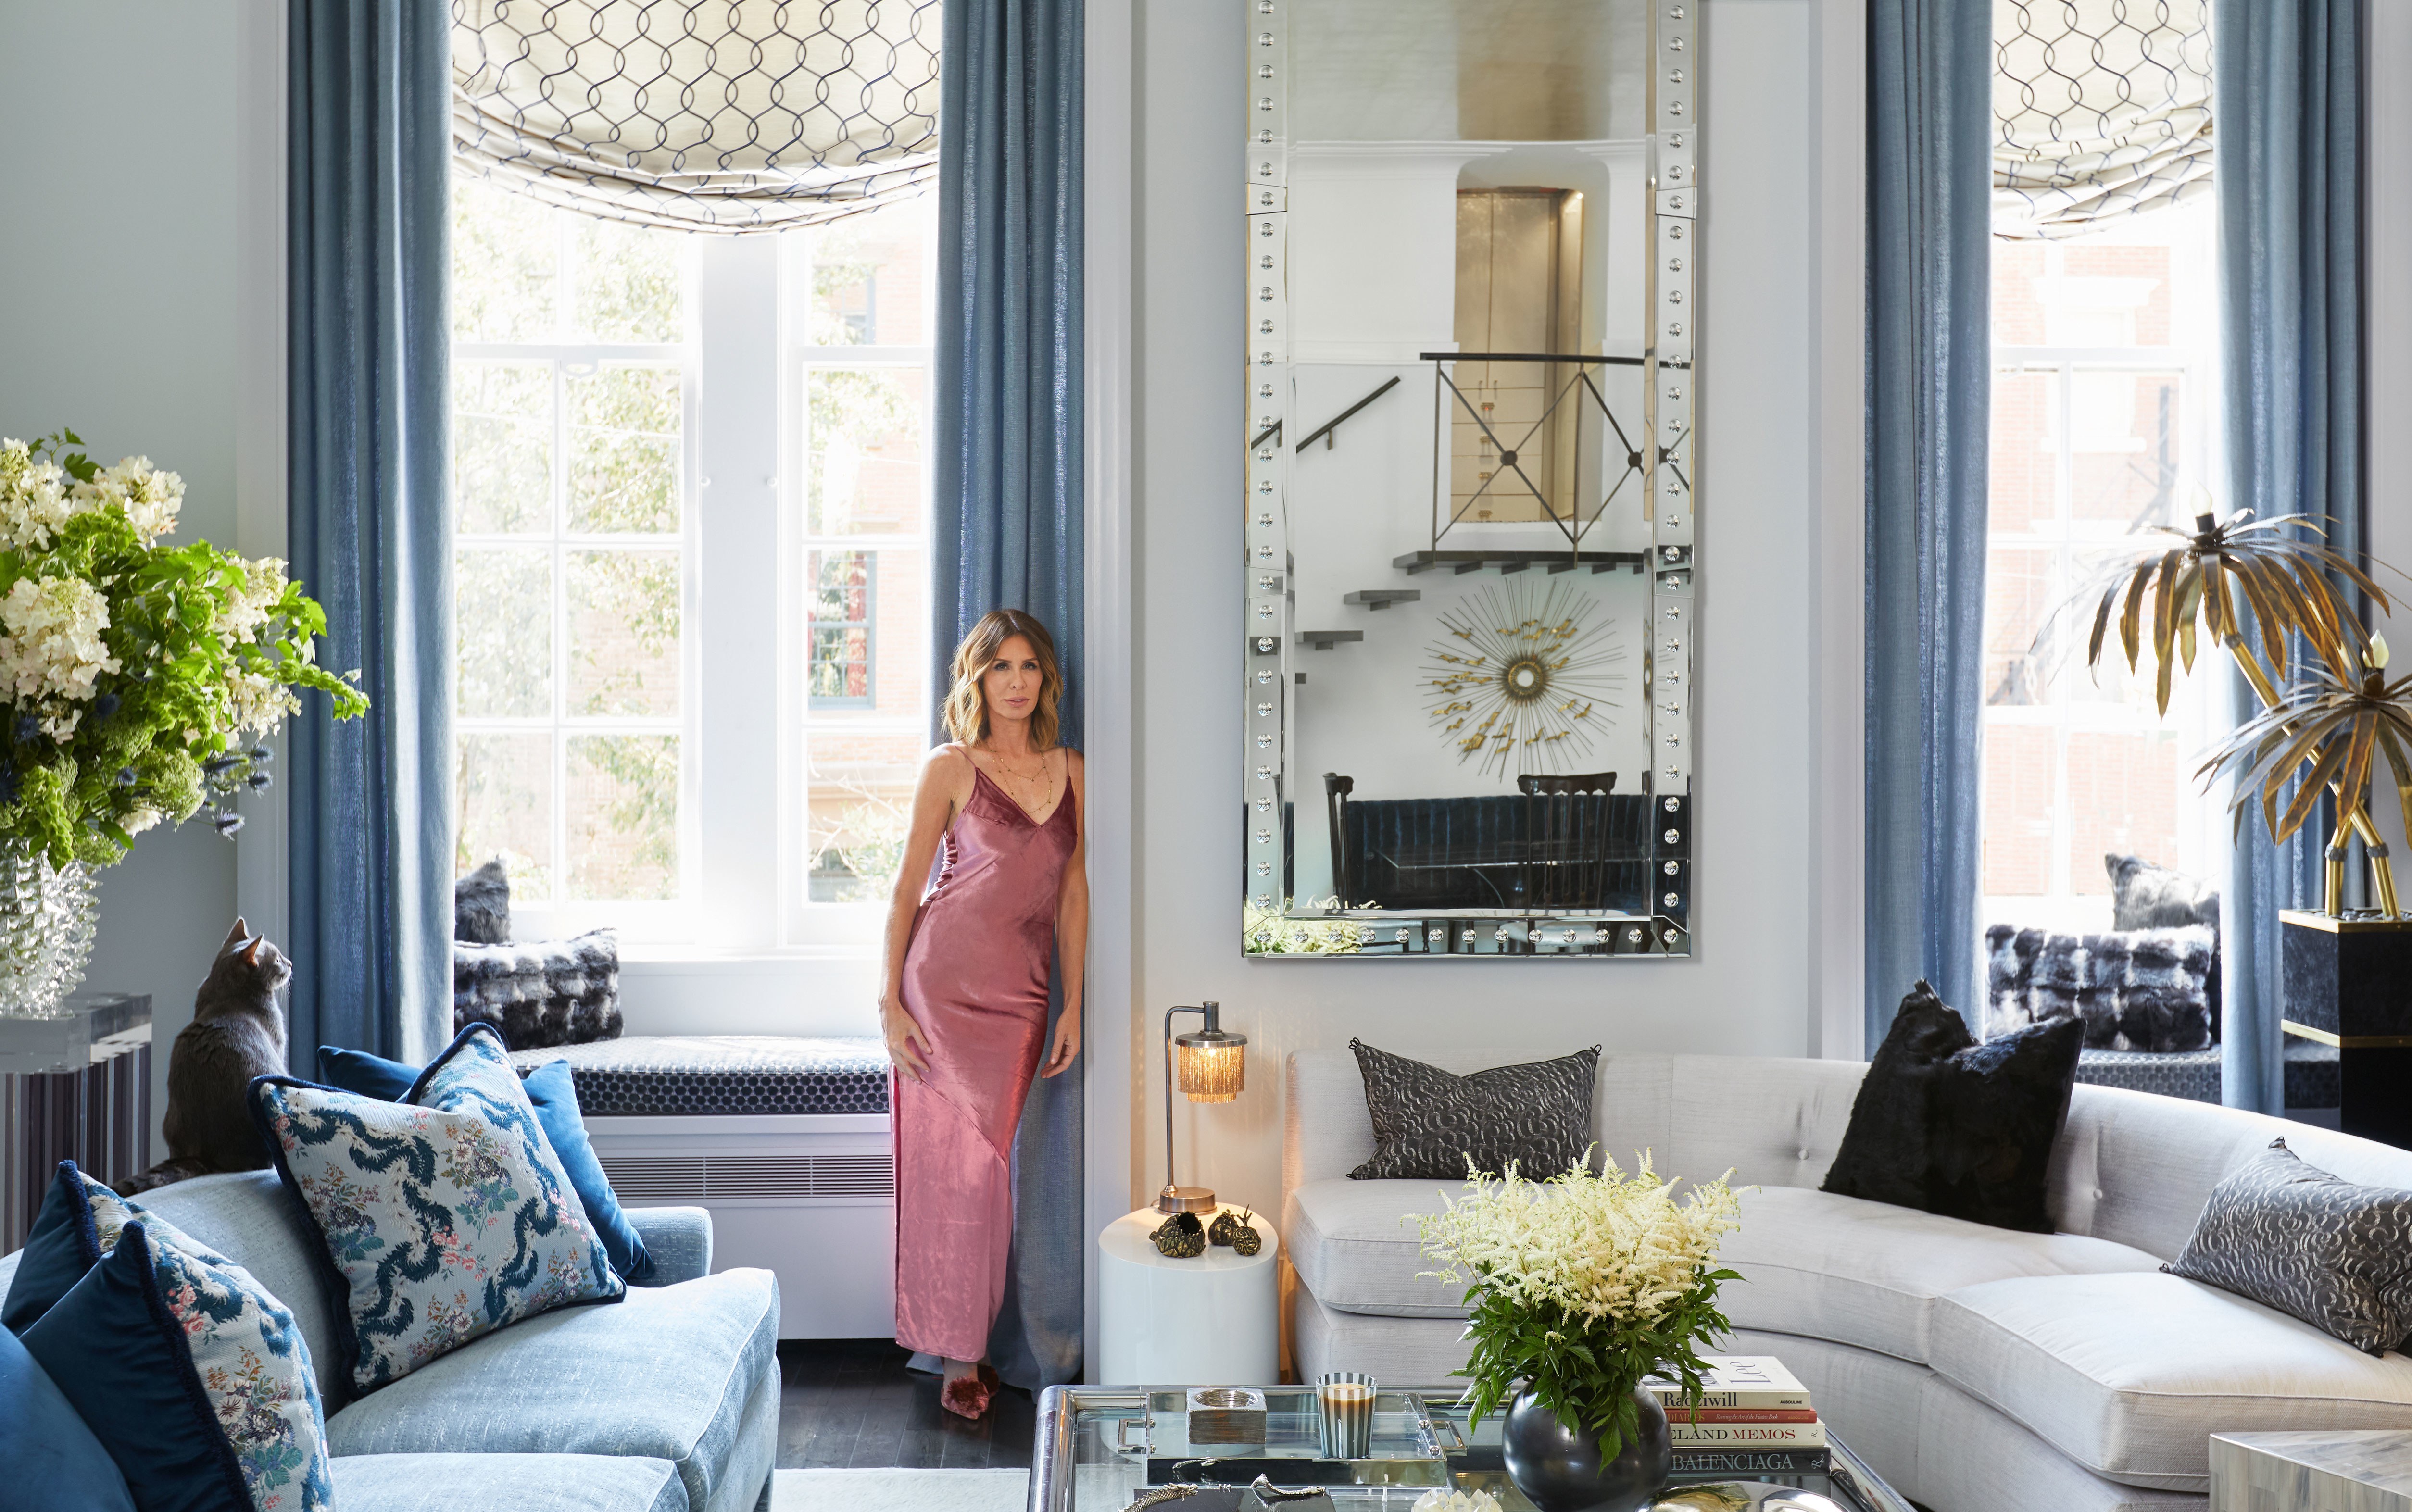 How to Manage Interior Design Options With Minimum Wasted Hours | Fohlio | FF&E specification software | Carole Radziwill | Architectural Digest